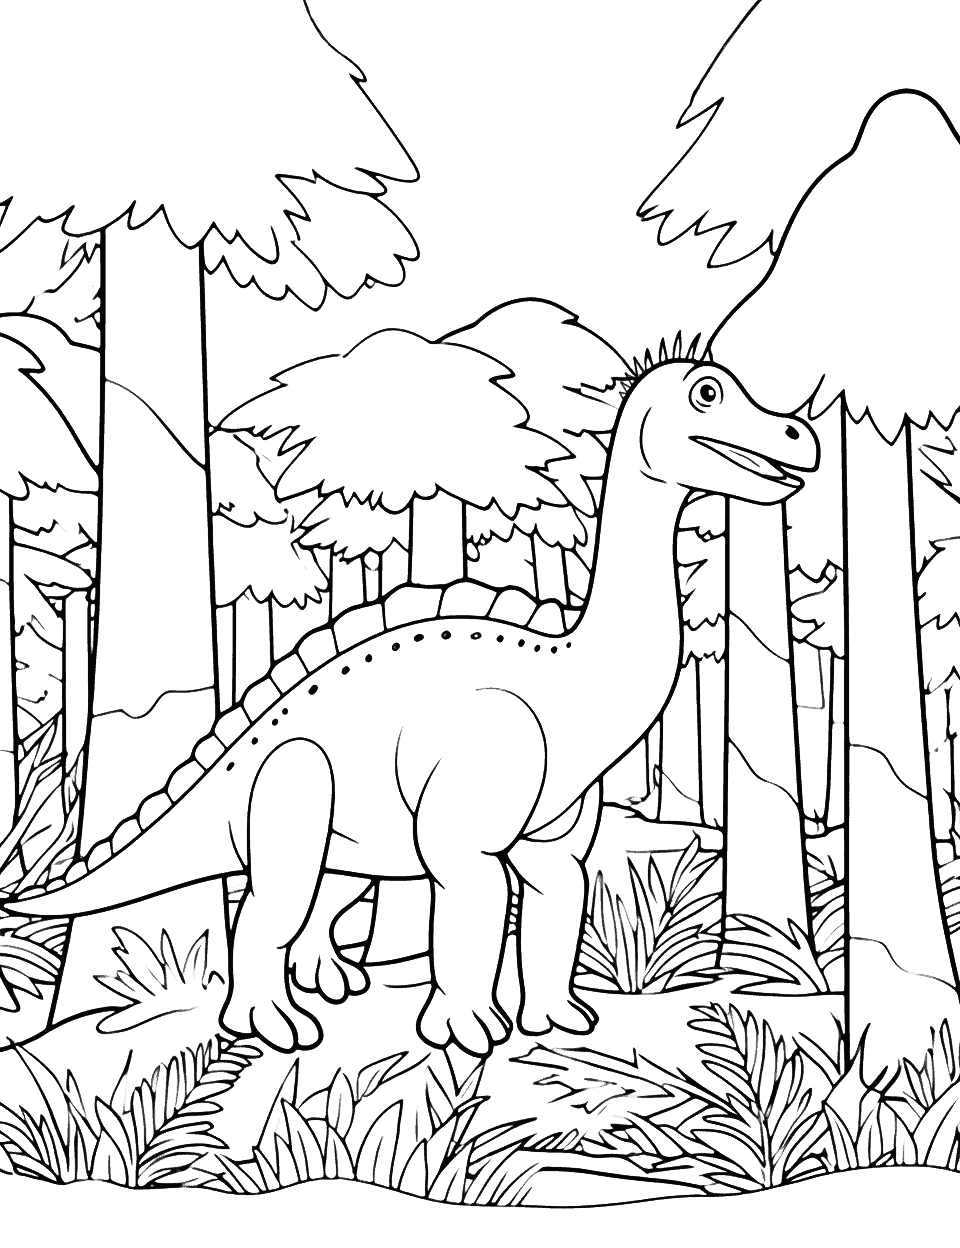 Parasaurolophus in the Forest Dinosaur Coloring Page - A Parasaurolophus calling to its herd in a dense forest.